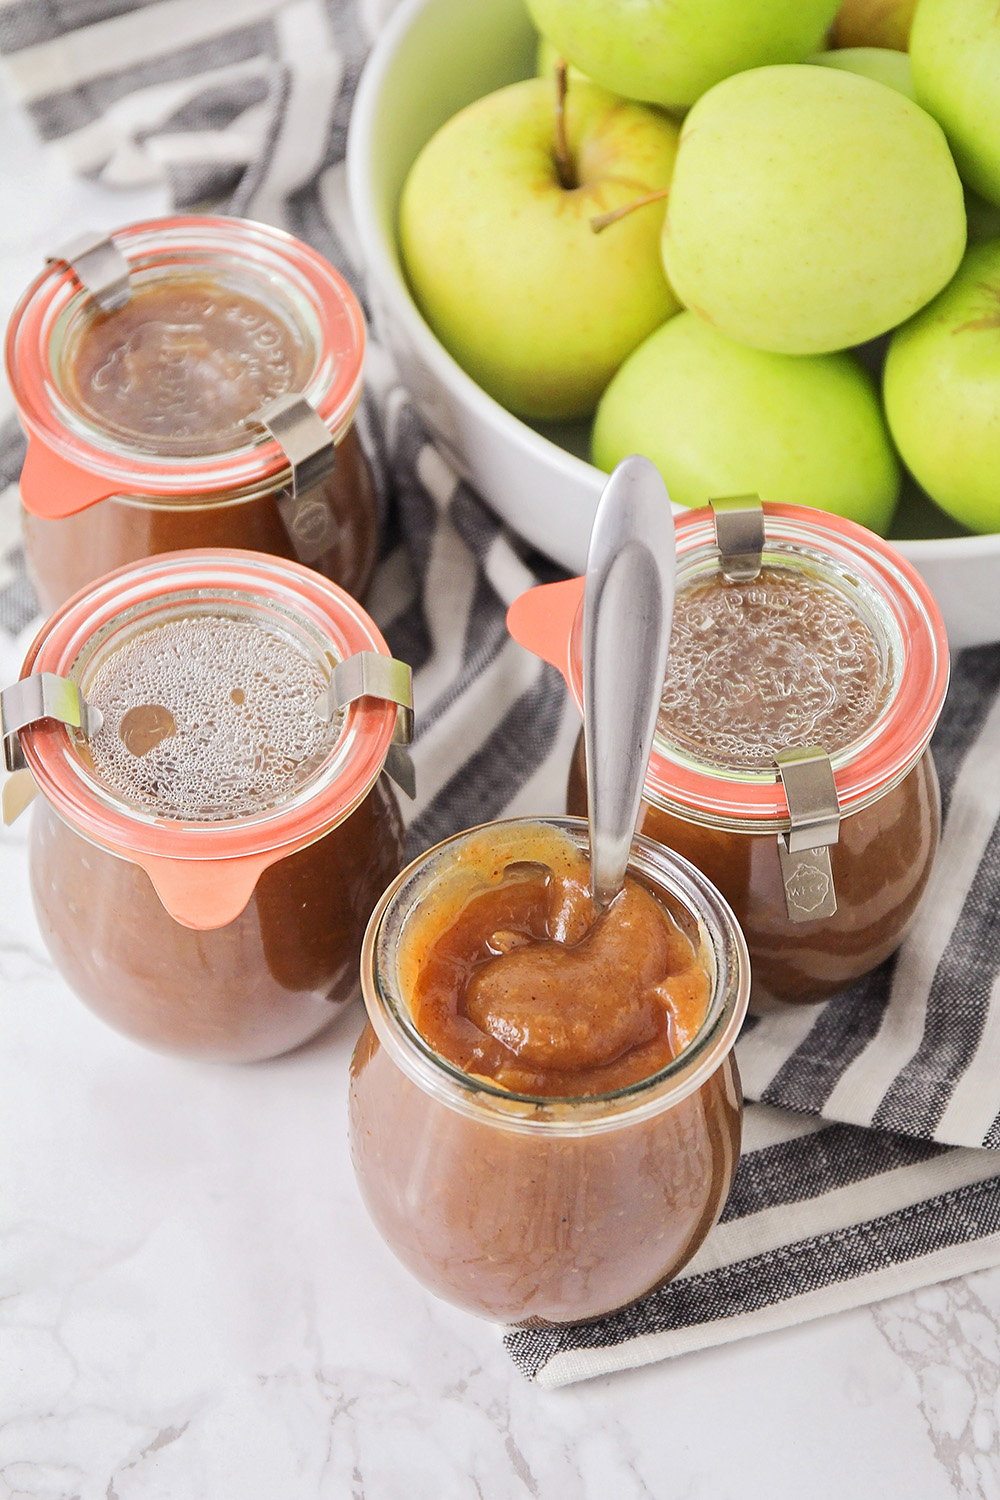 This instant pot apple butter tastes fantastic and is so quick and easy to make!